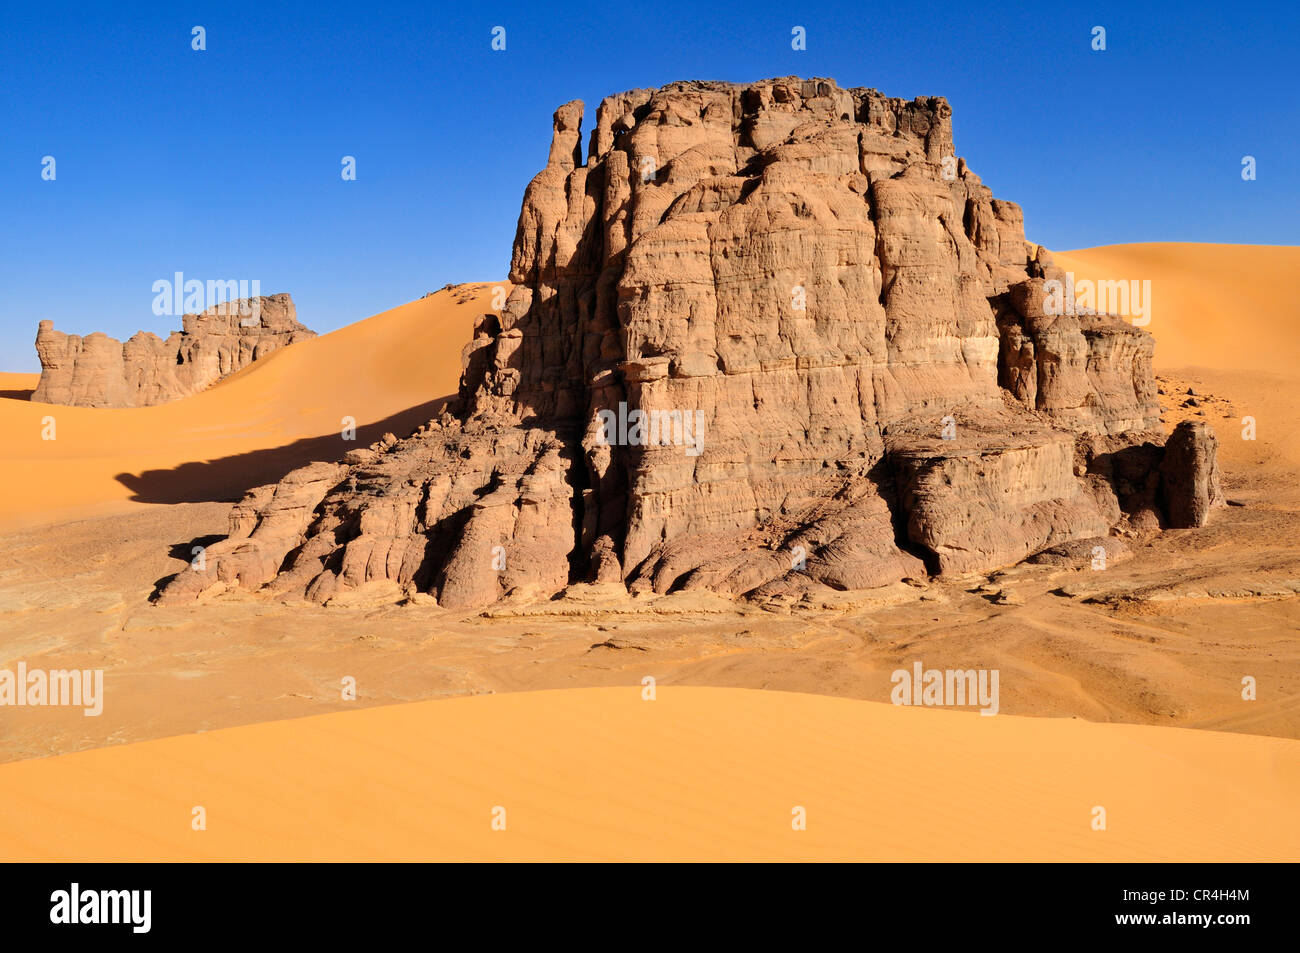 Rock formation in the dunes of Moul N´Aga, Acacus Mountains or Tadrart Acacus range, Tassili n'Ajjer National Park Stock Photo